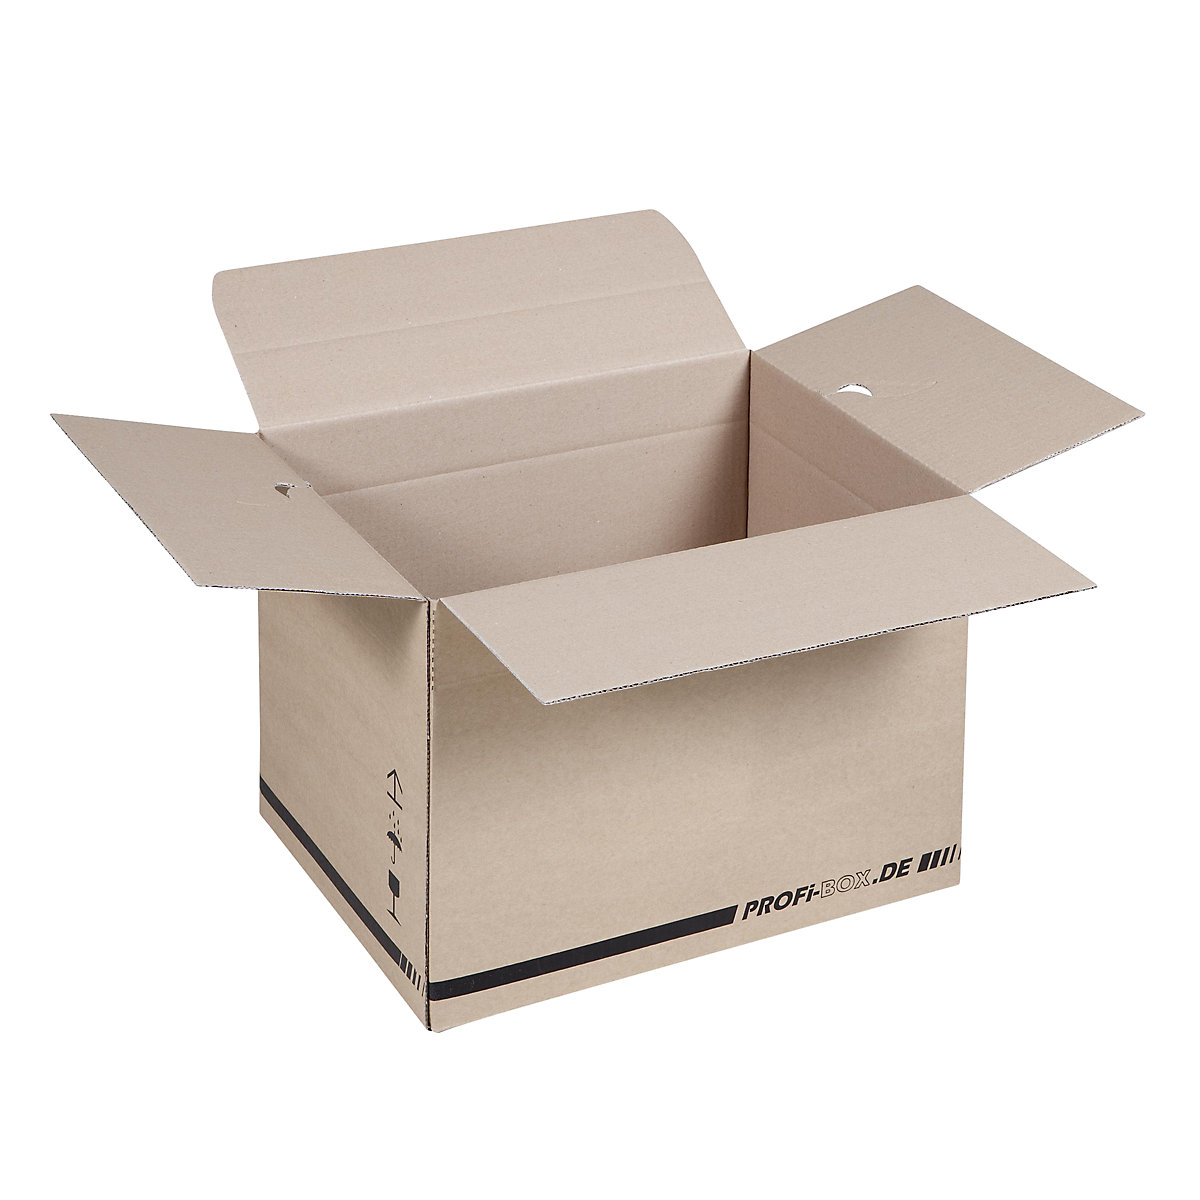 Professional boxes